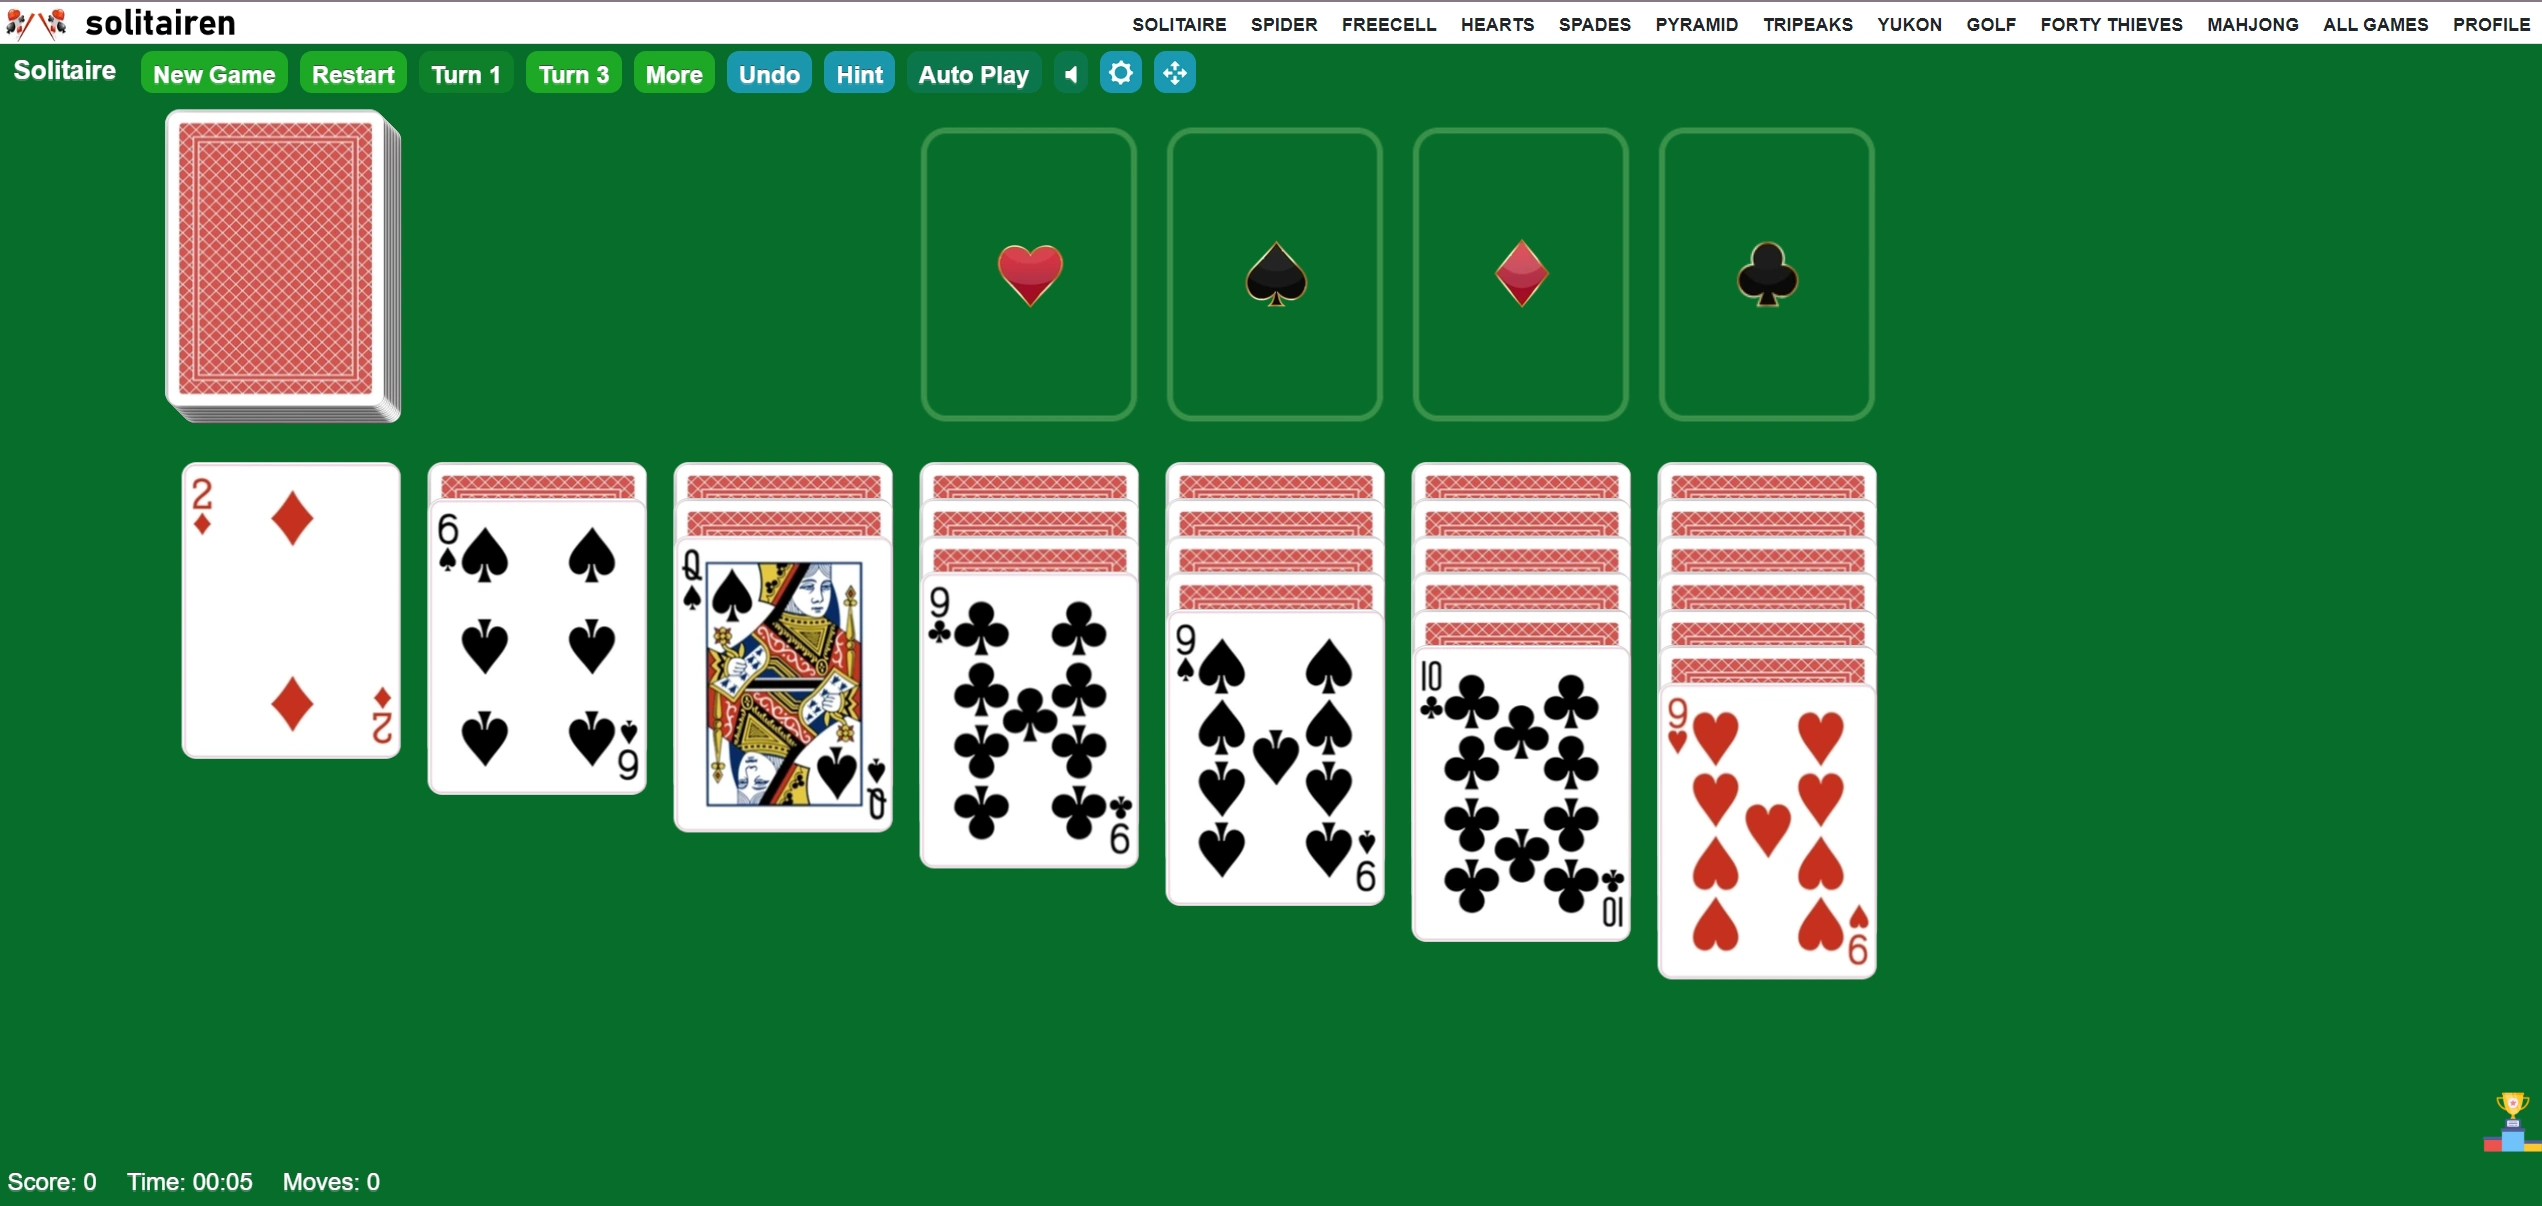 Key Terms and Elements in a Game of Klondike Solitaire